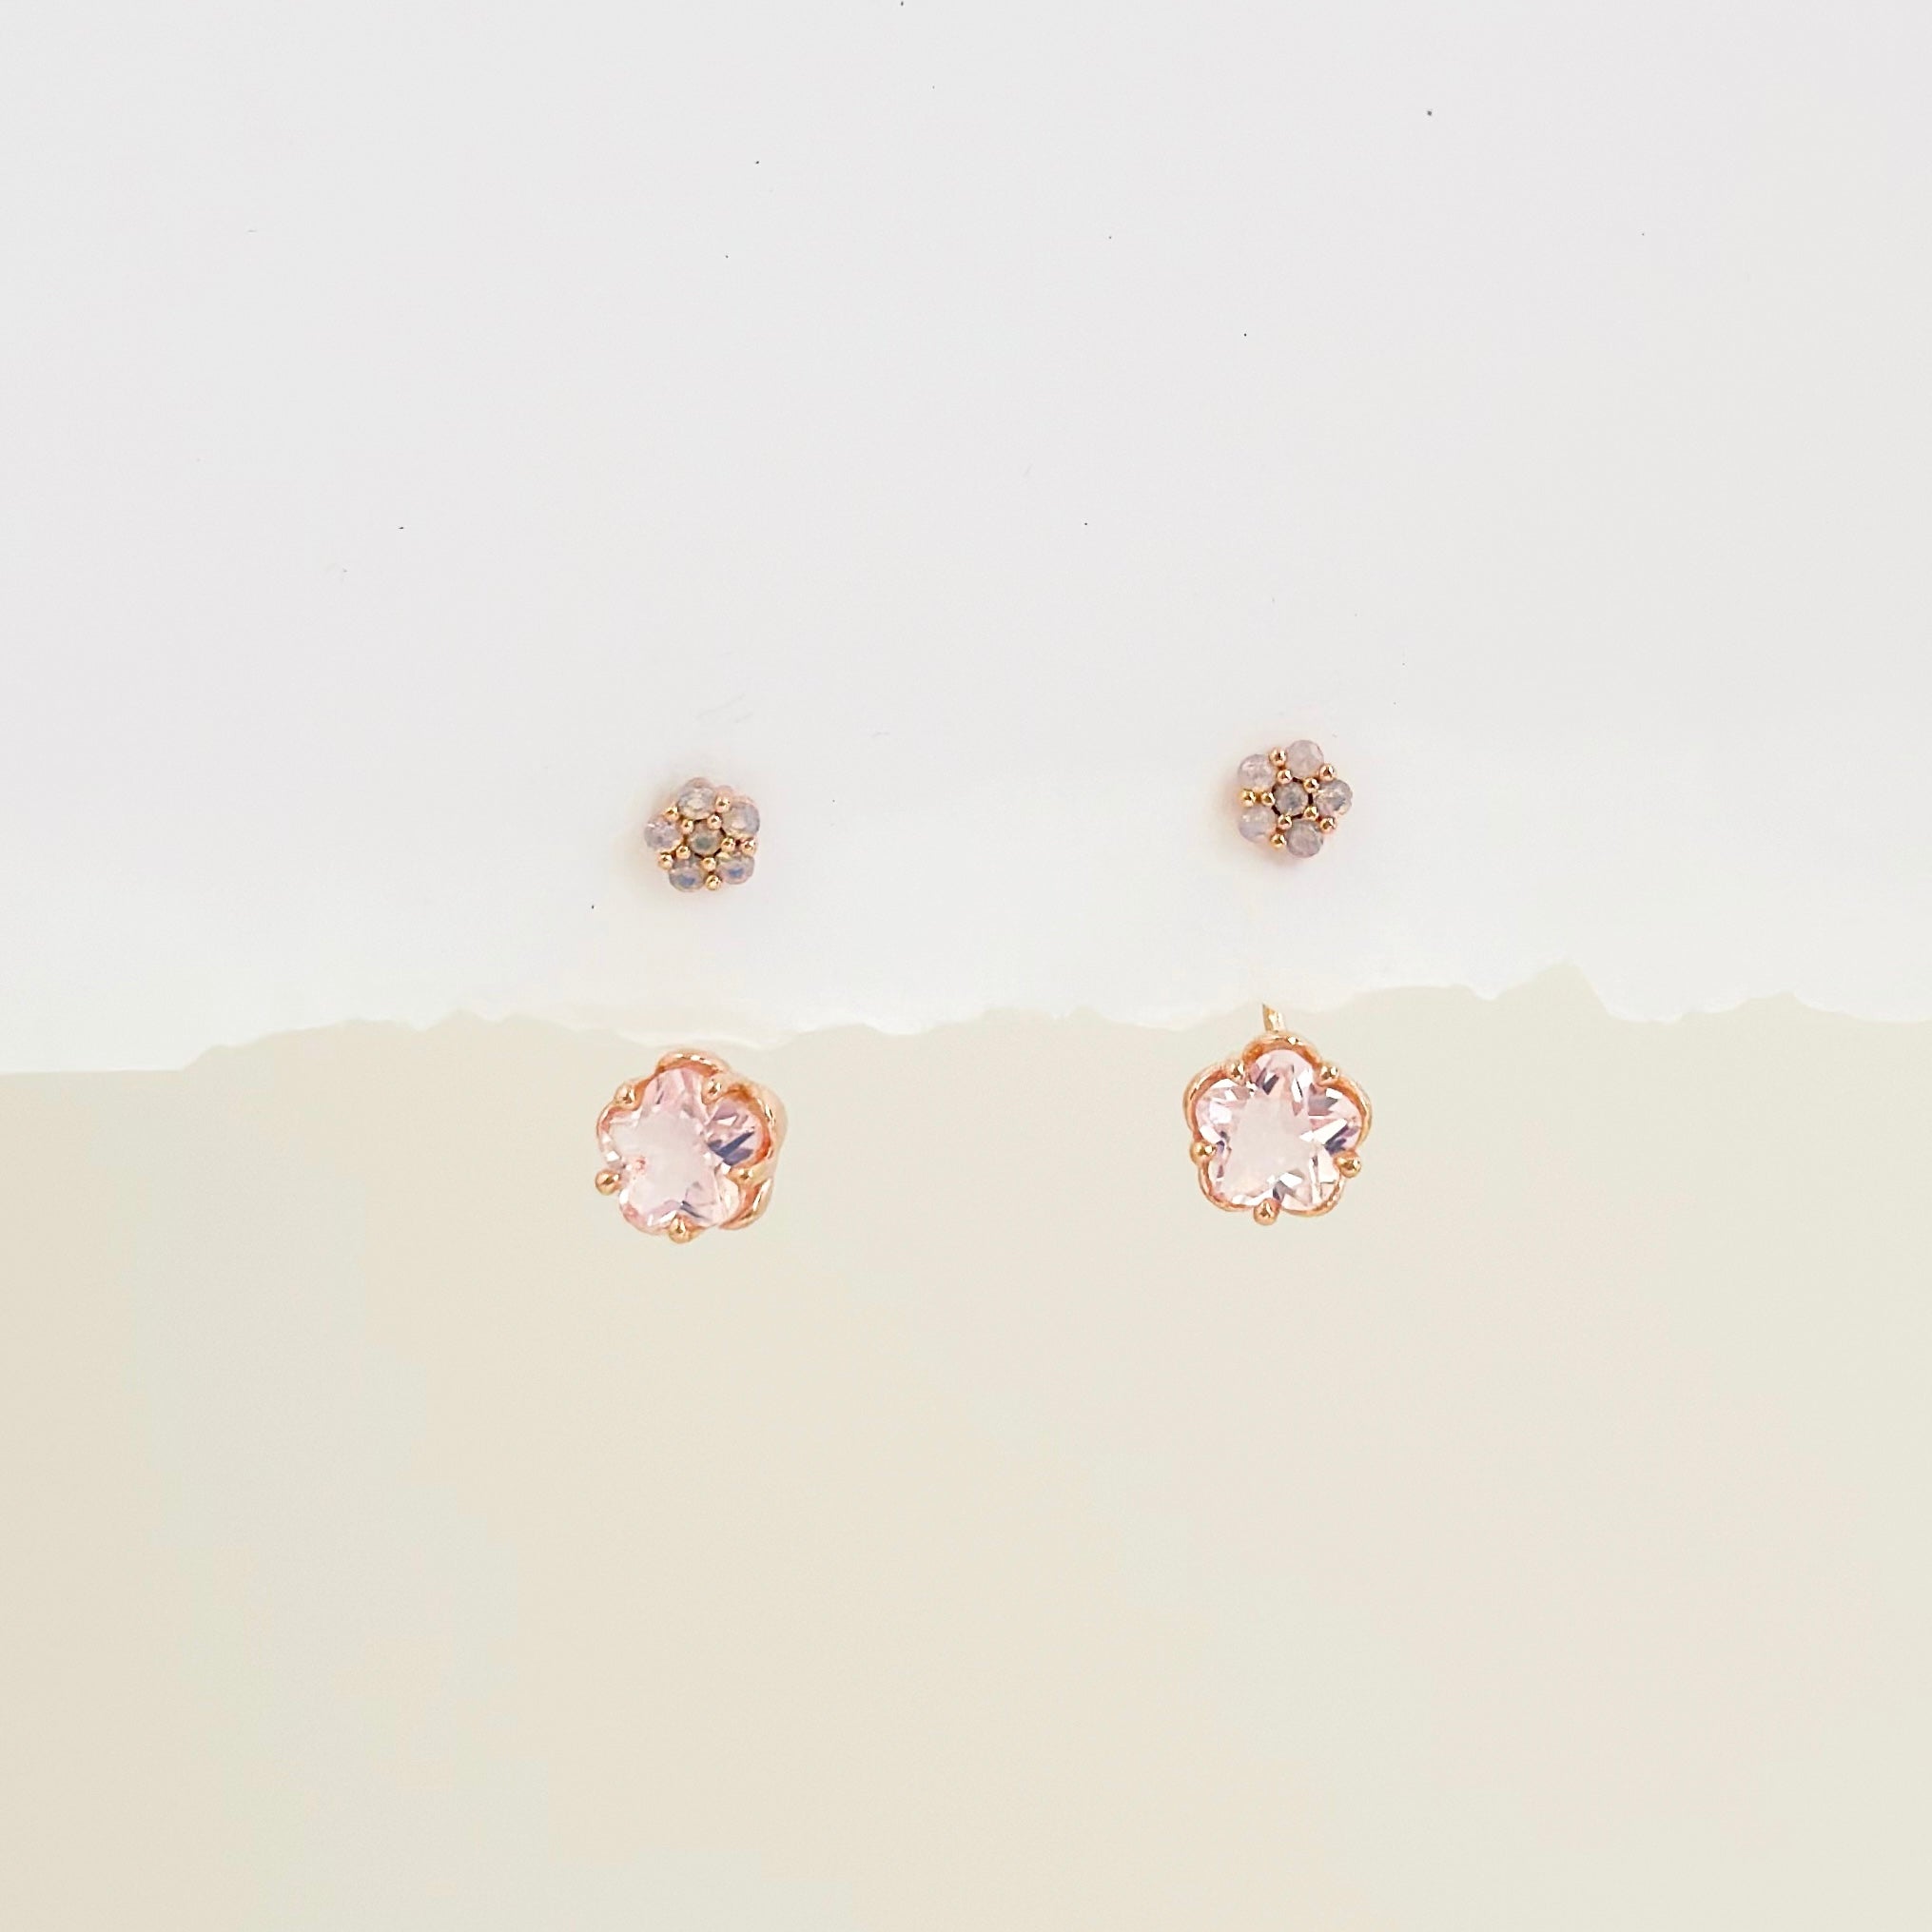 Rose Gold Made in Korea Earrings Korean Anting Cubic Zirconia Bride Bridal Dinner 925 Sterling Silver hypoallergenic Instagram gift shops Jewellery Online Malaysia Shopping No Piercing Perfect Gift From Heart For Your Loved One Online jewellery Malaysia Gift for her Rose Gold Korea Made Earrings Korean Jewellery Jewelry Local Brand in Malaysia Cubic Zirconia Dainty Delicate Minimalist Jewellery Jewelry Bride Clip On Earrings Silver Christmas Gift Set butterfly present gift for her gift ideas